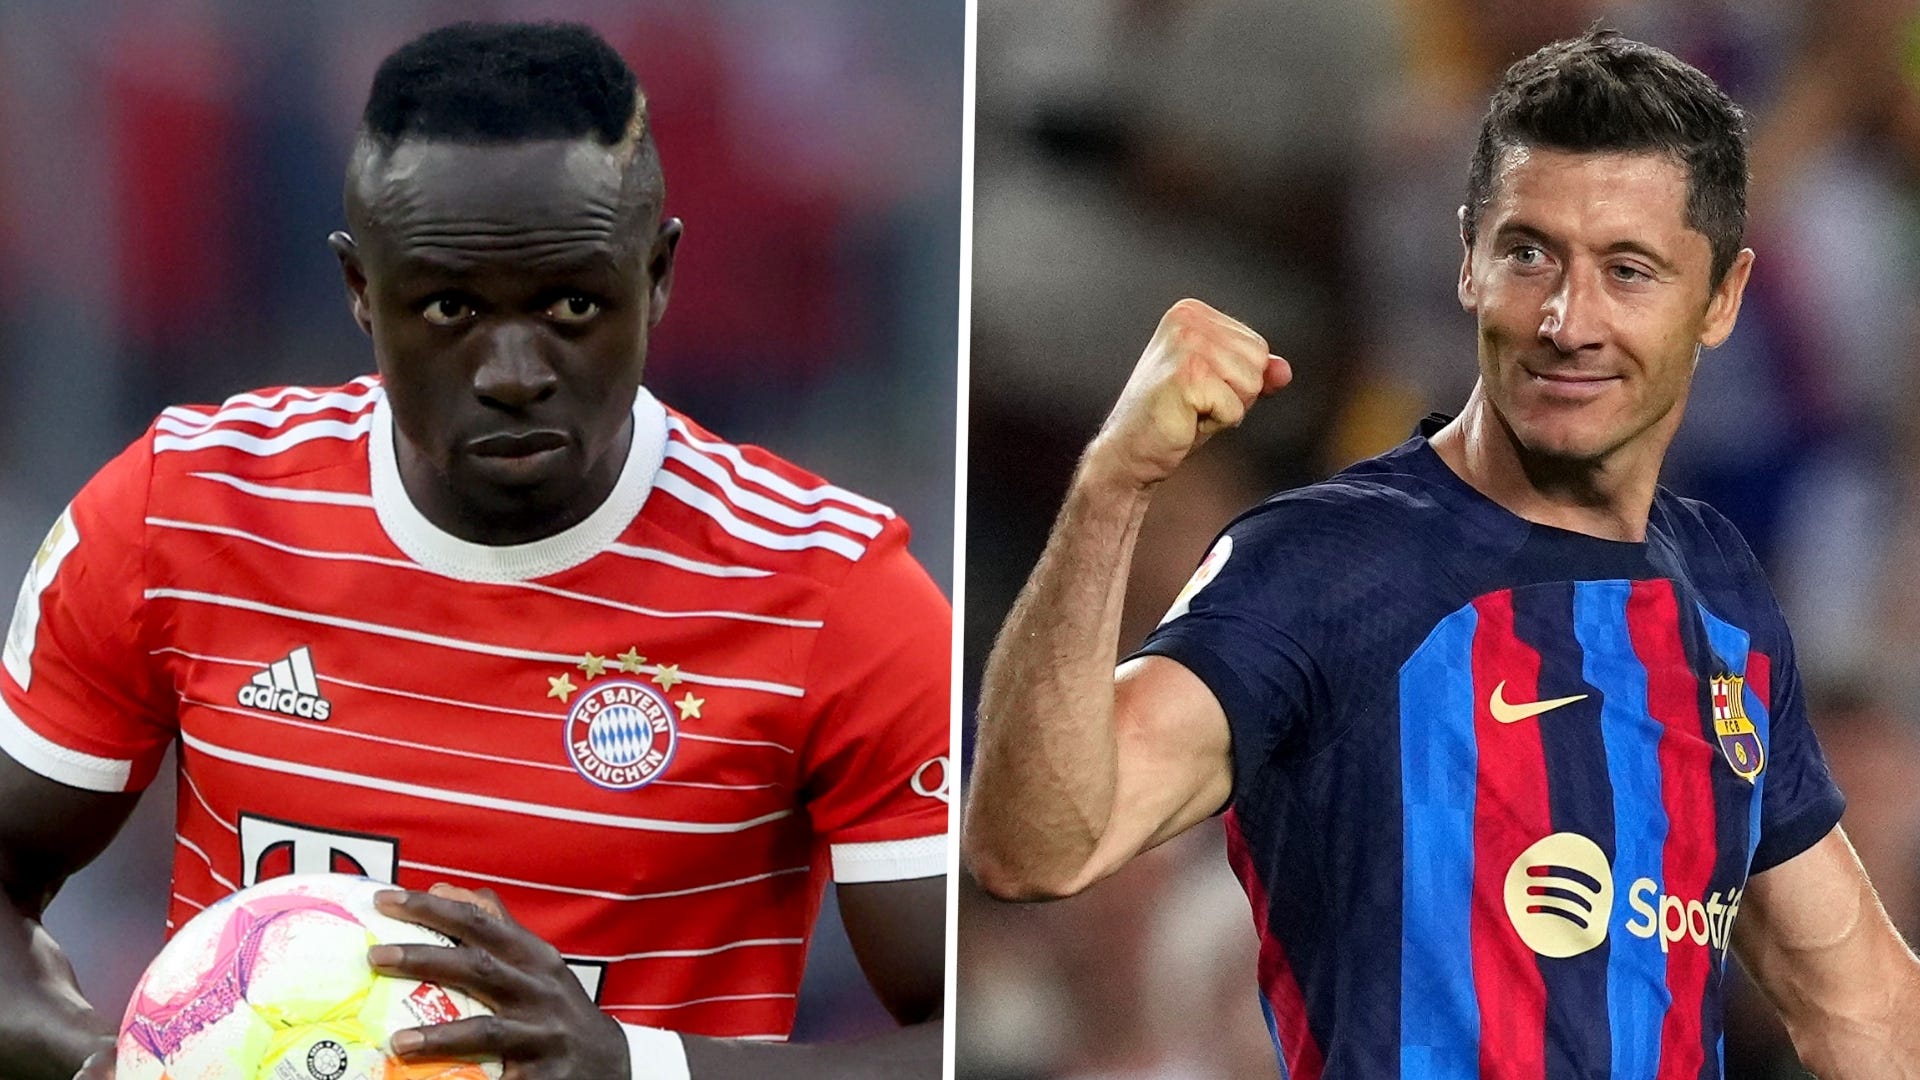 Bayern Munich vs Barcelona Live stream, TV channel, kick-off time and where to watch Goal